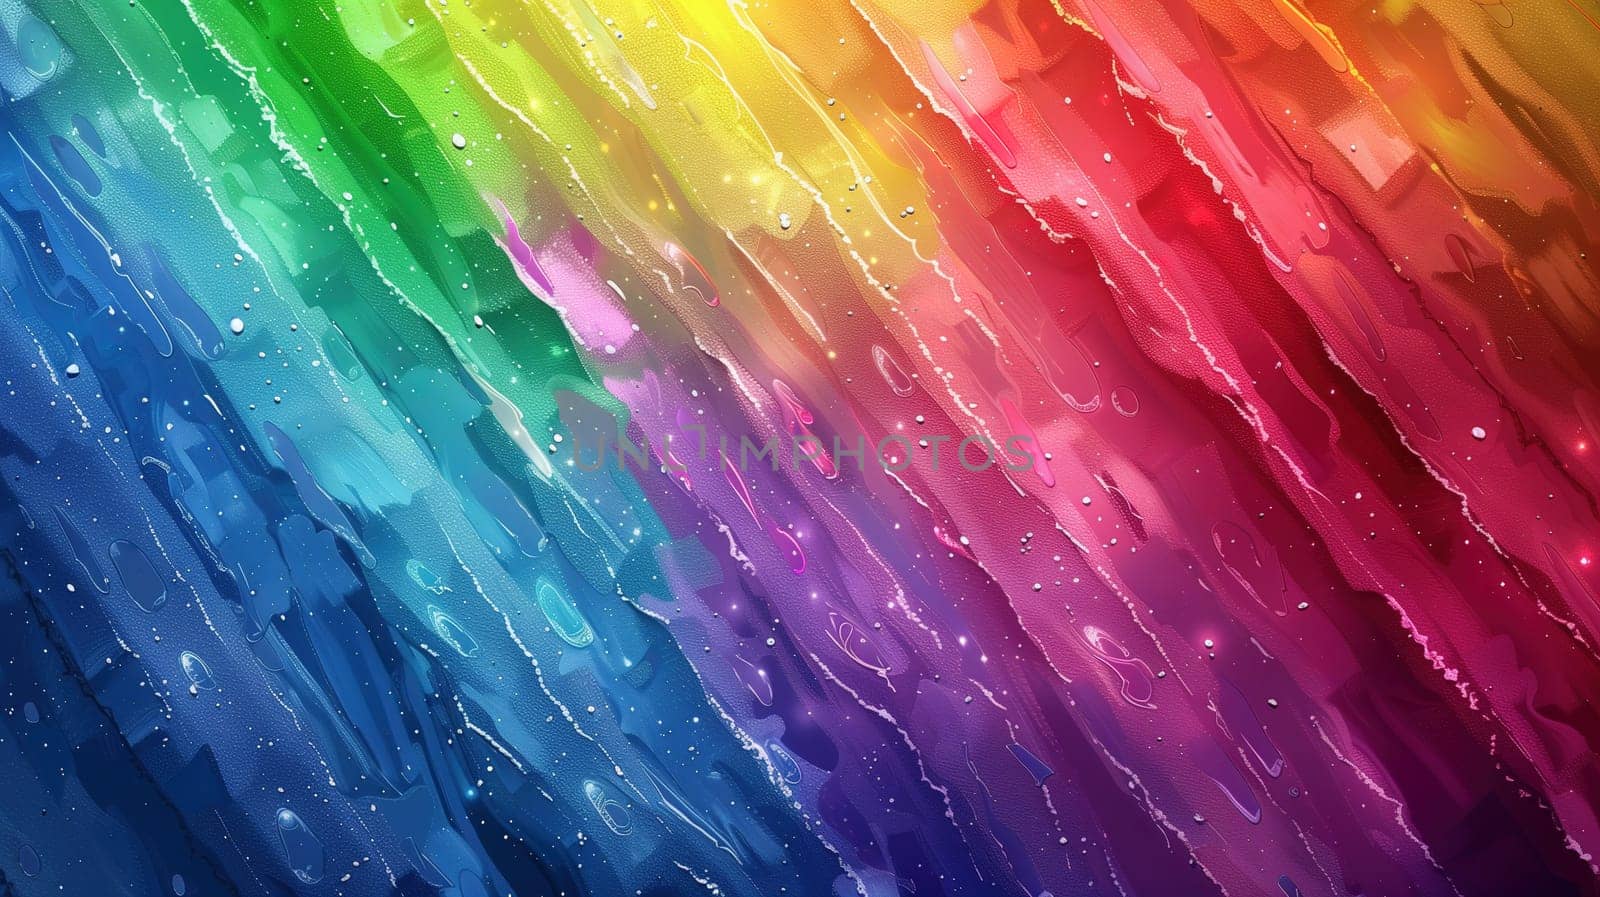 Rainbow Colored Wallpaper With Water Droplets by TRMK